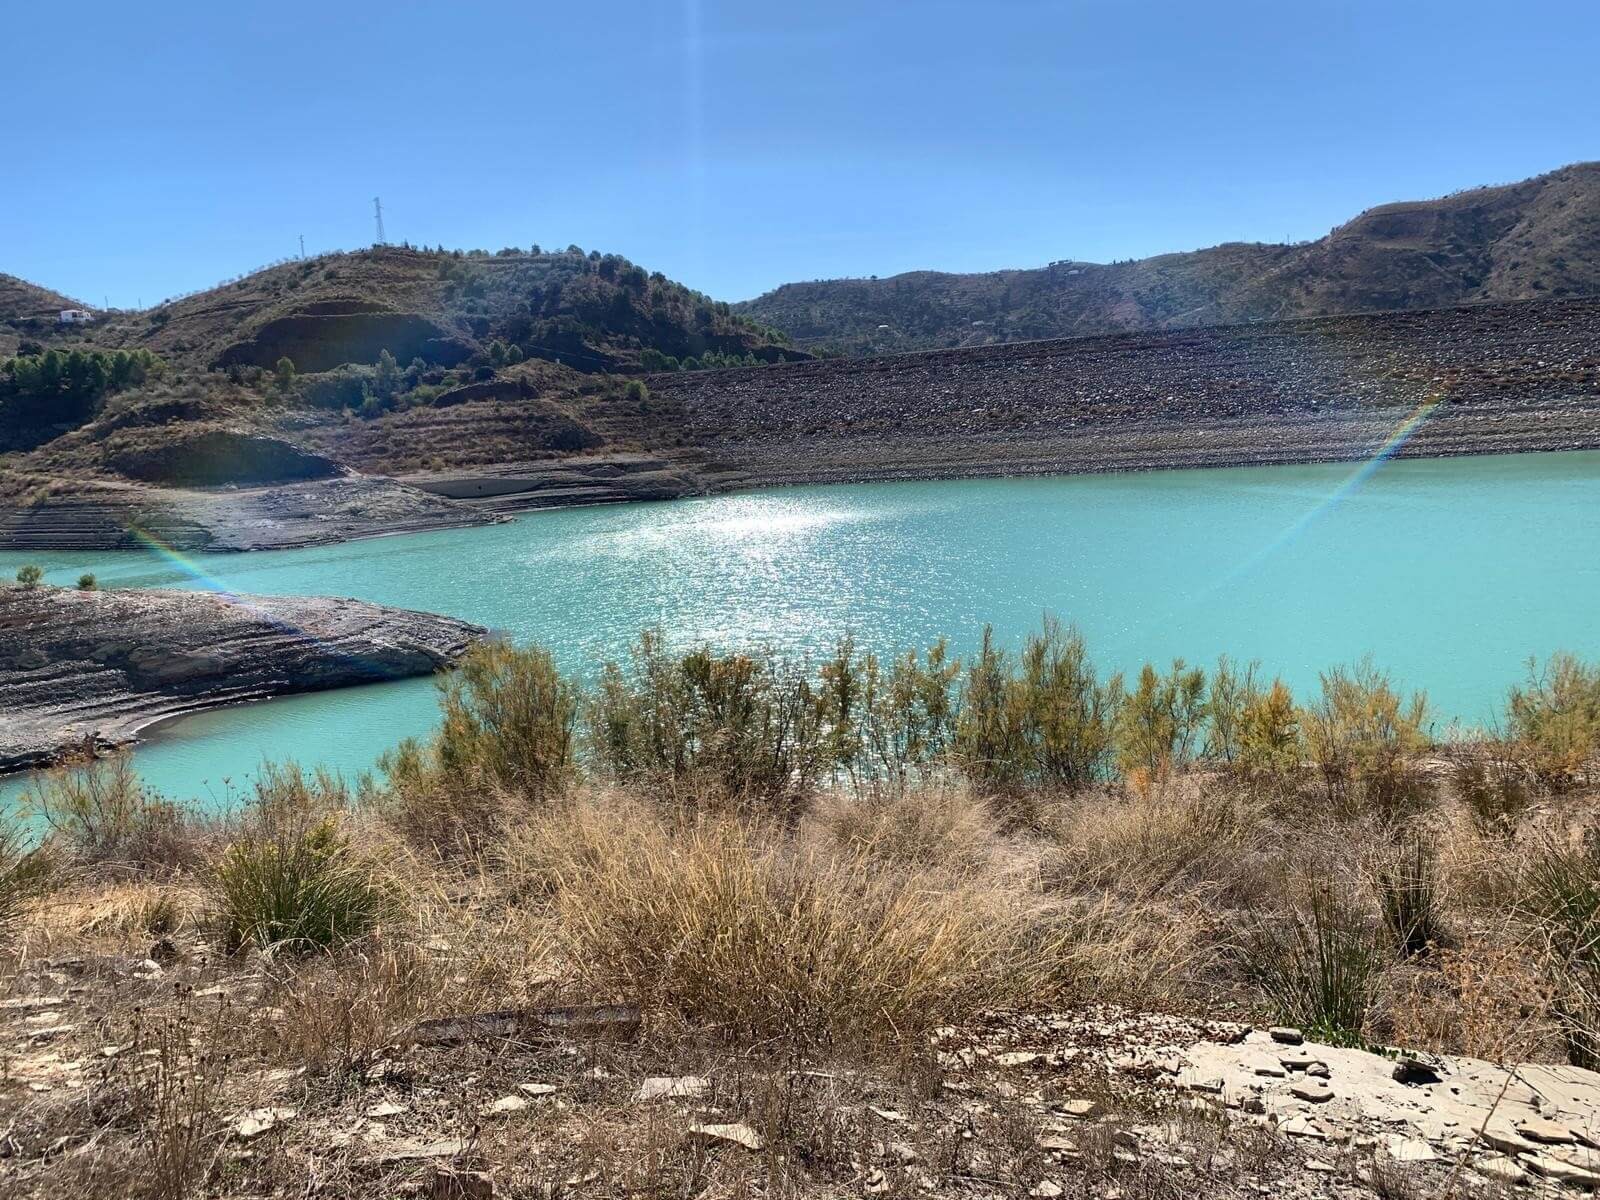 Overlooking Lake Vinuela. It is a sunny day and the sky is blue. The sun is reflecting off of the blue water in the lake.